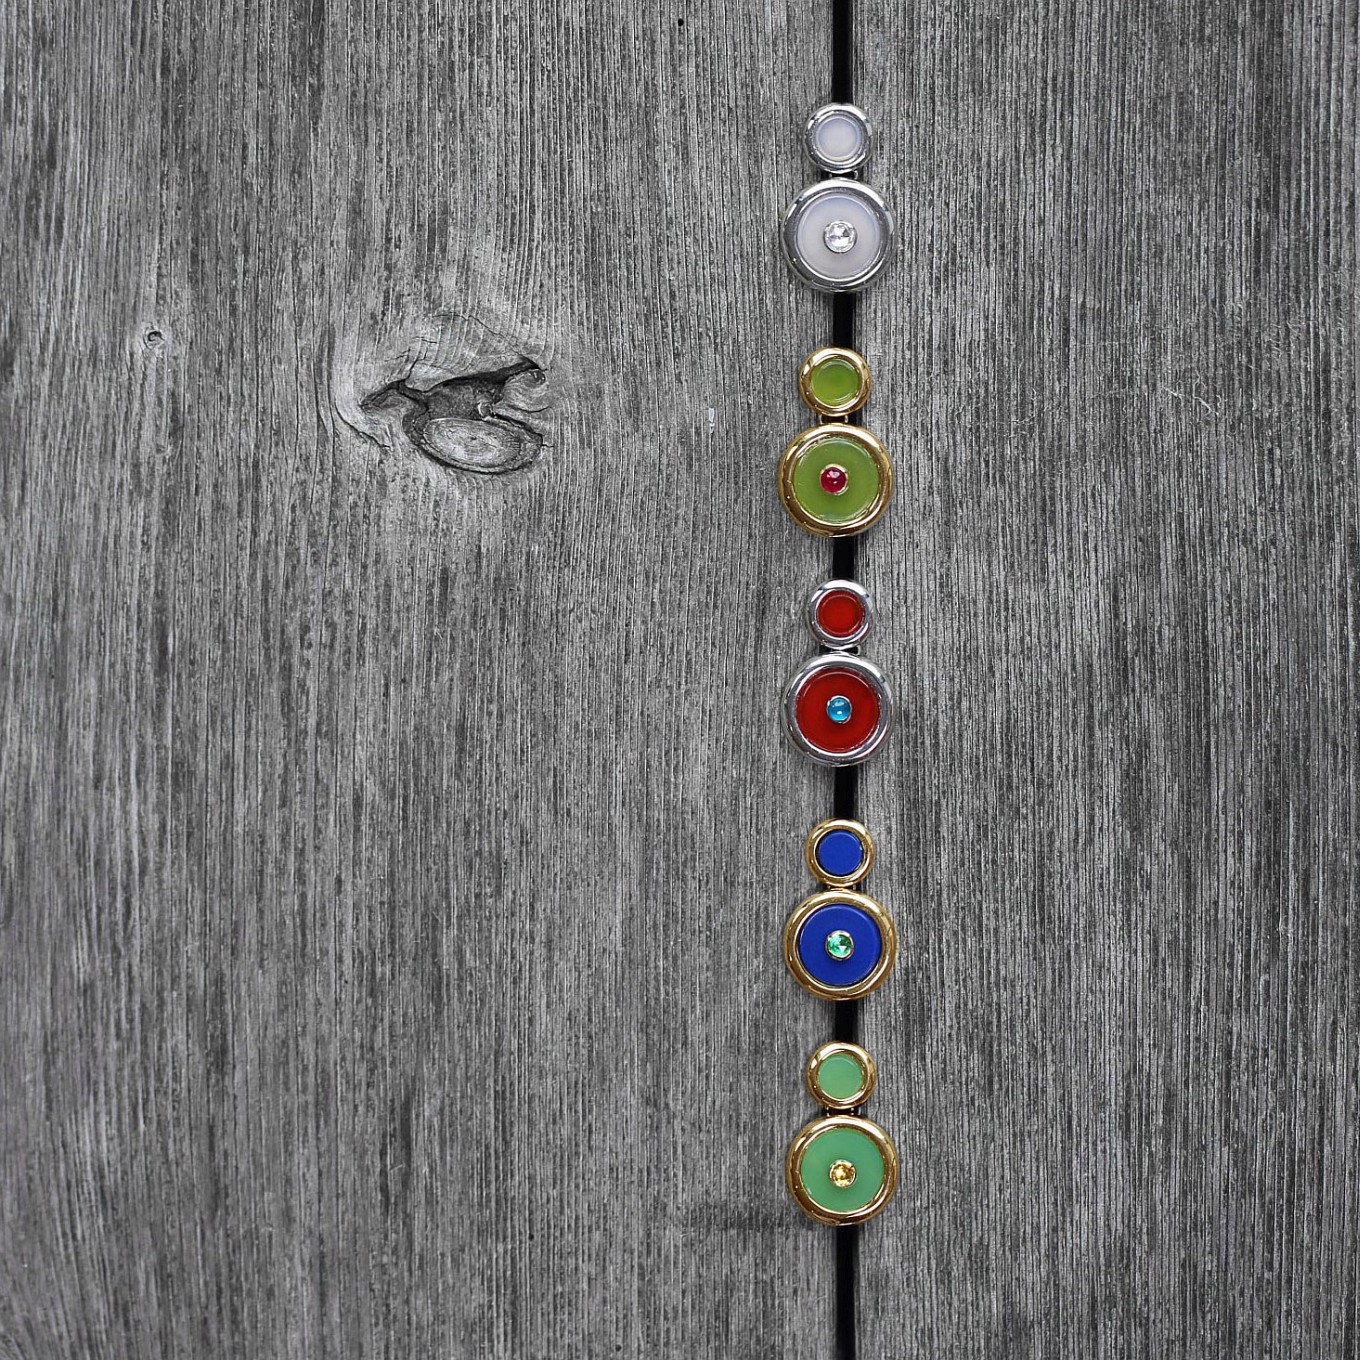 “Button“ earrings with hardstone discs & gemstones in gold from top:   Chalcedony & rose cut Diamond in white gold -  Jade & rose cut Rubies in yellow gold -  Carnelian & Apatite in white gold -  Lapis & Emerald in yellow gold - Chrysoprase & Yellow Sapphire in yellow gold